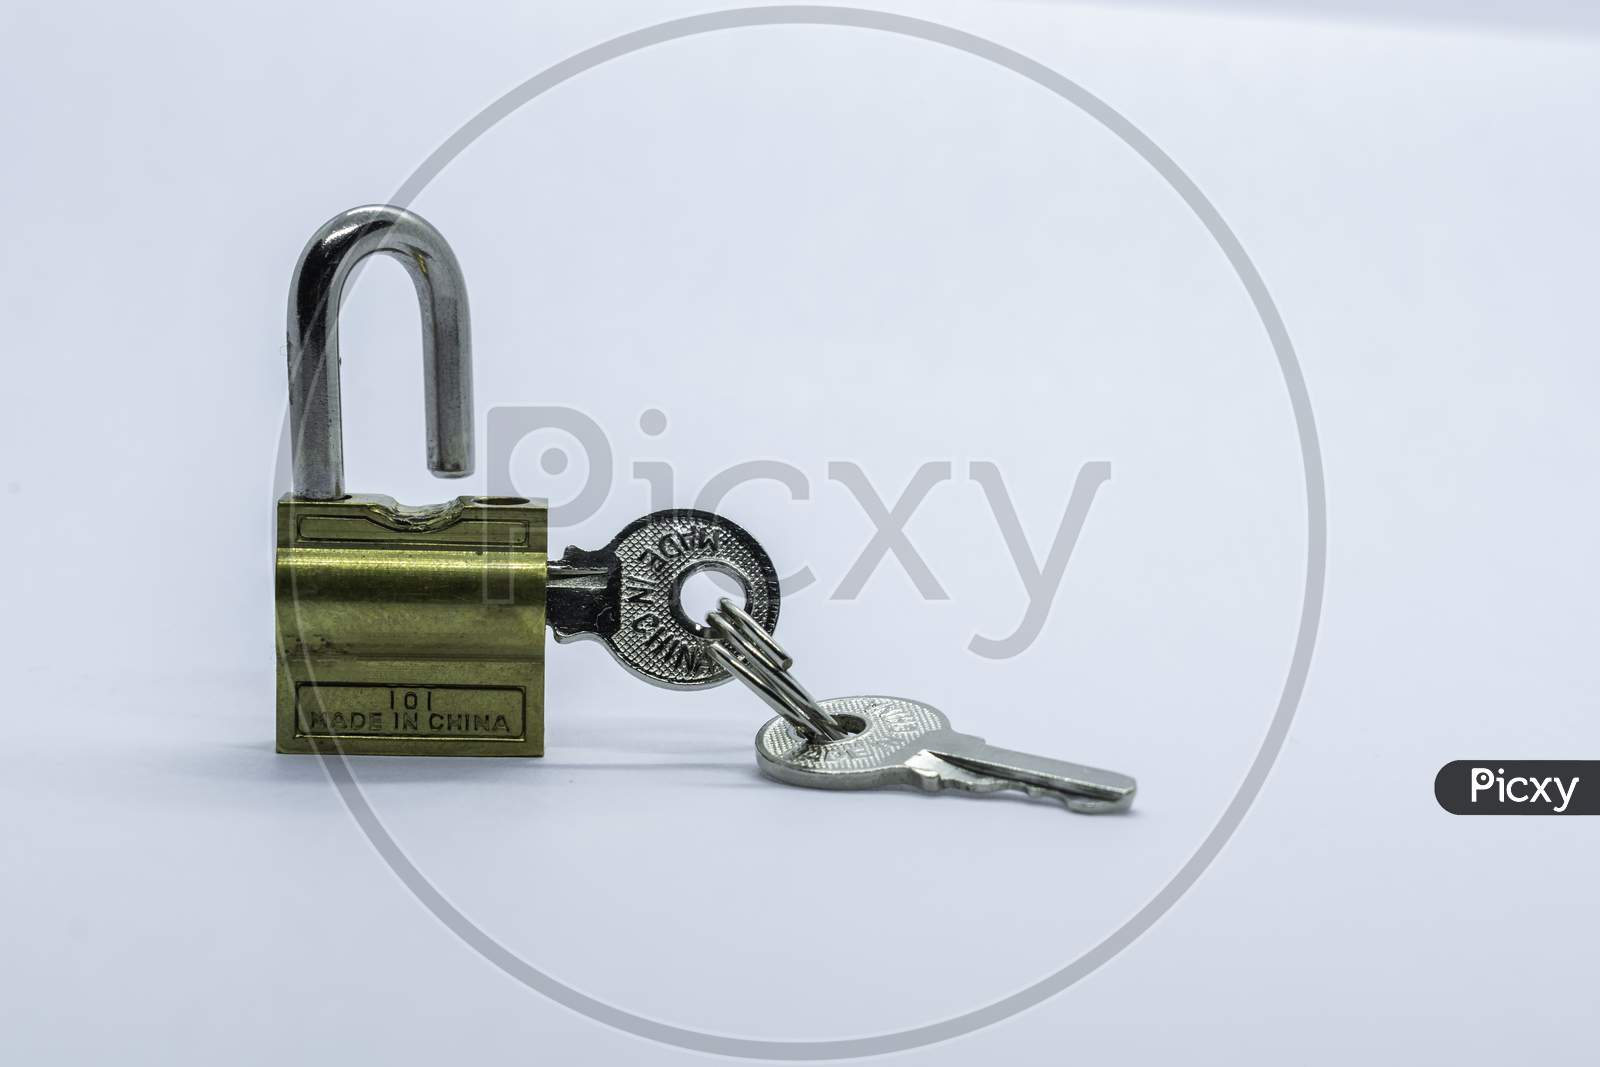 A Lock And Key On A Plain White Background.